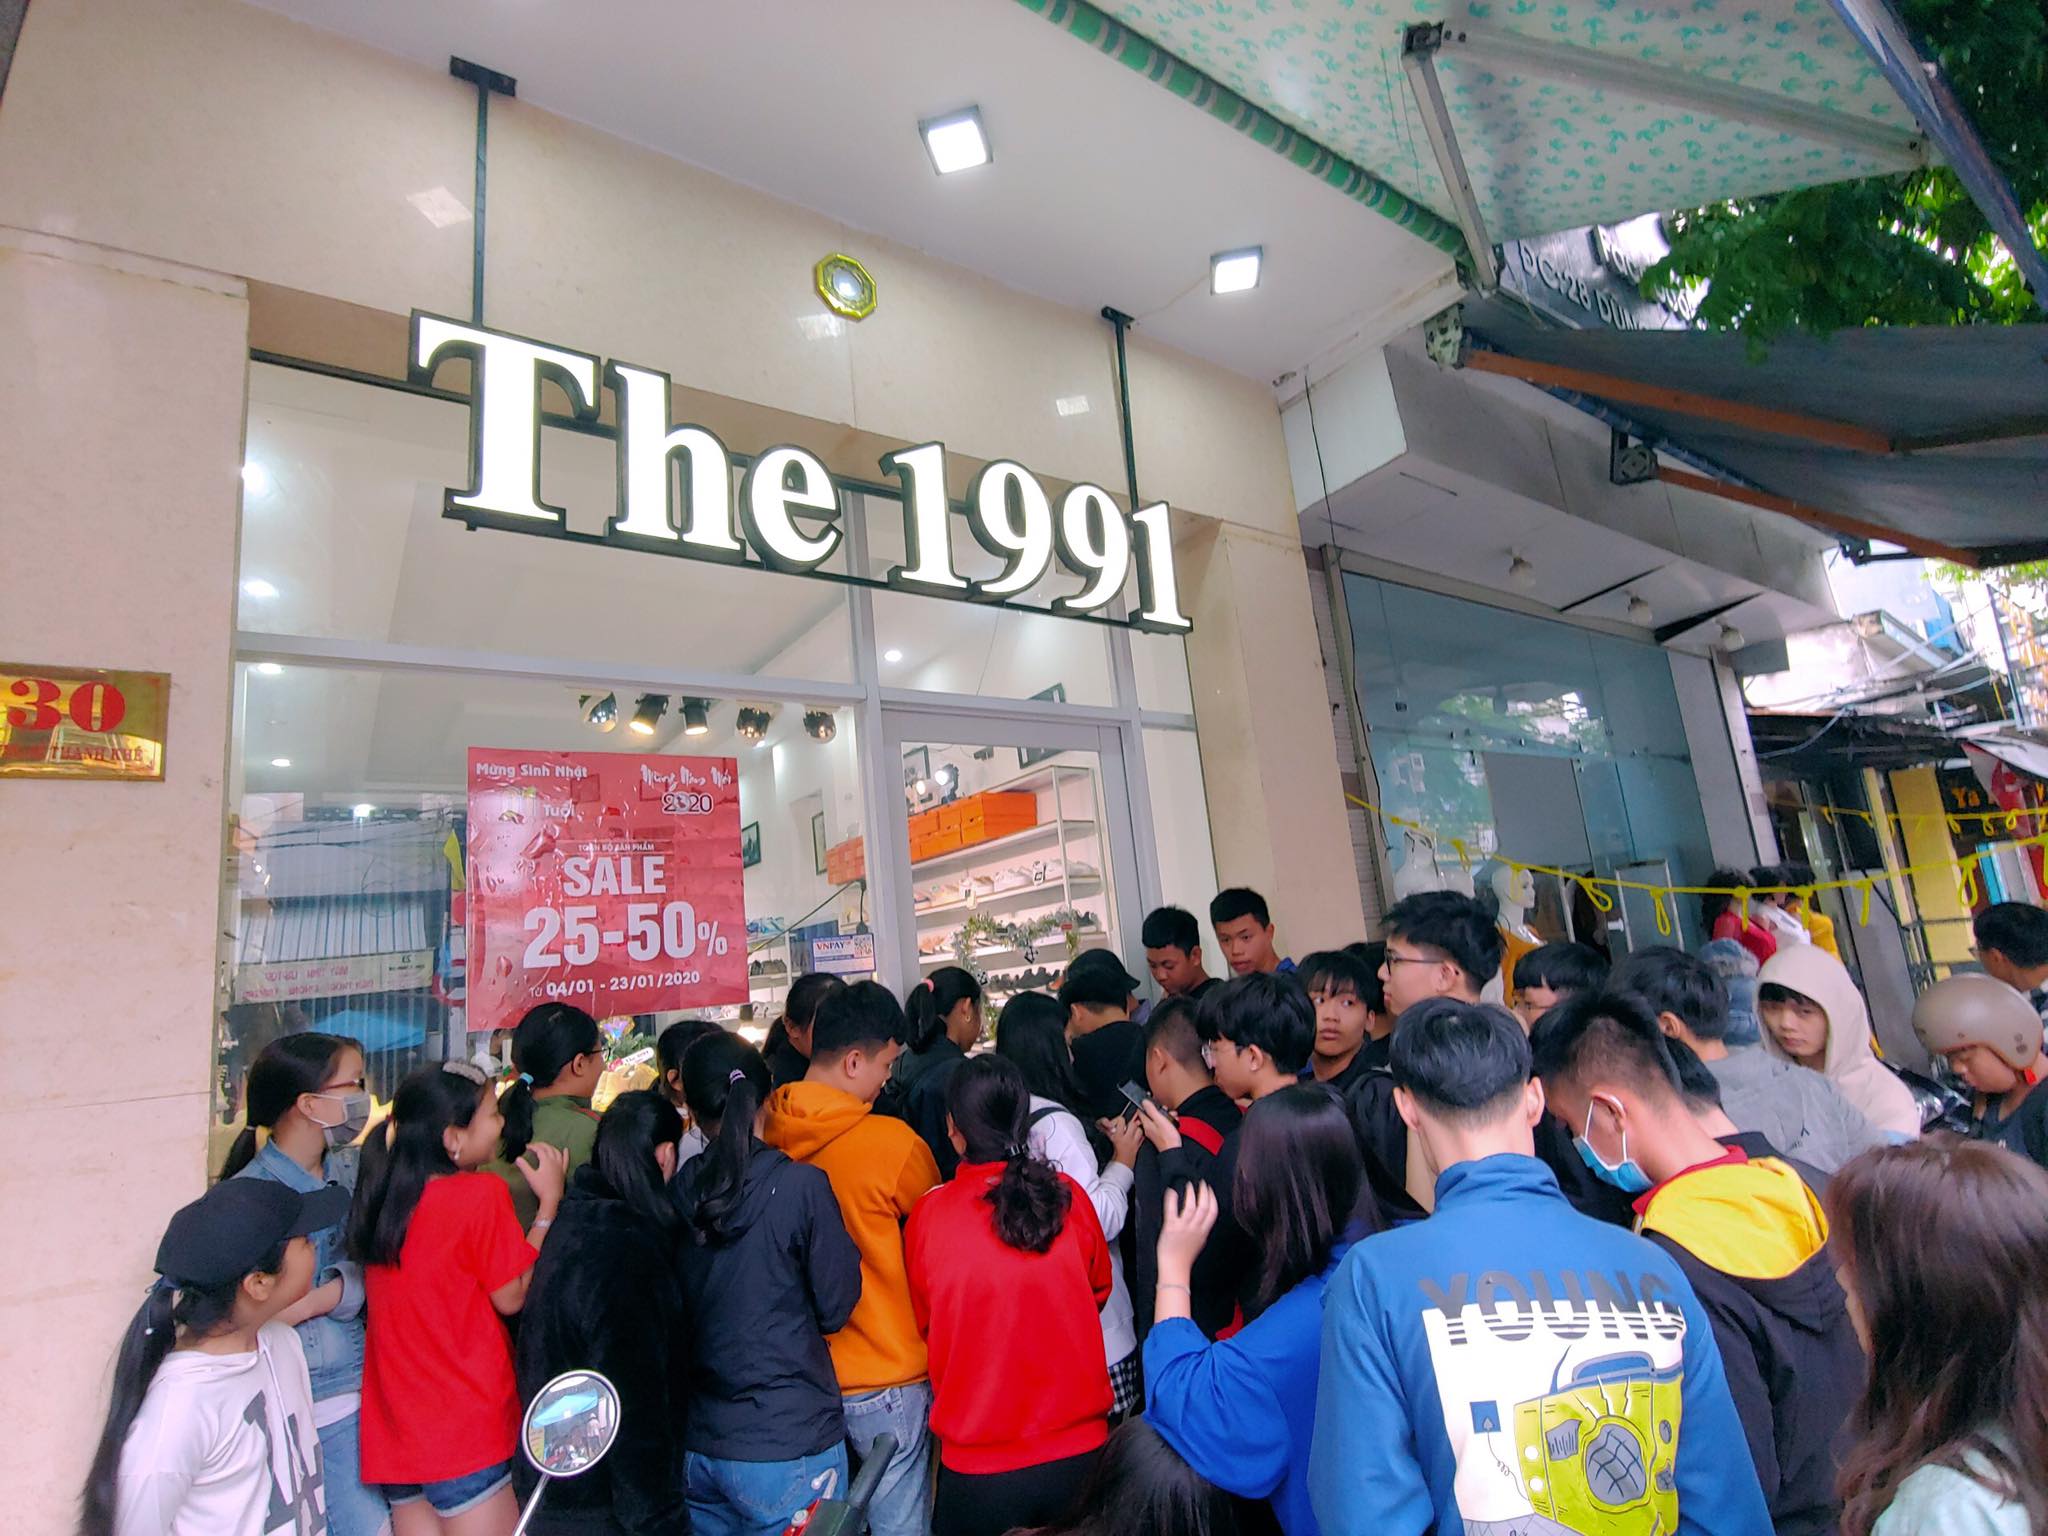 The 1991 Store